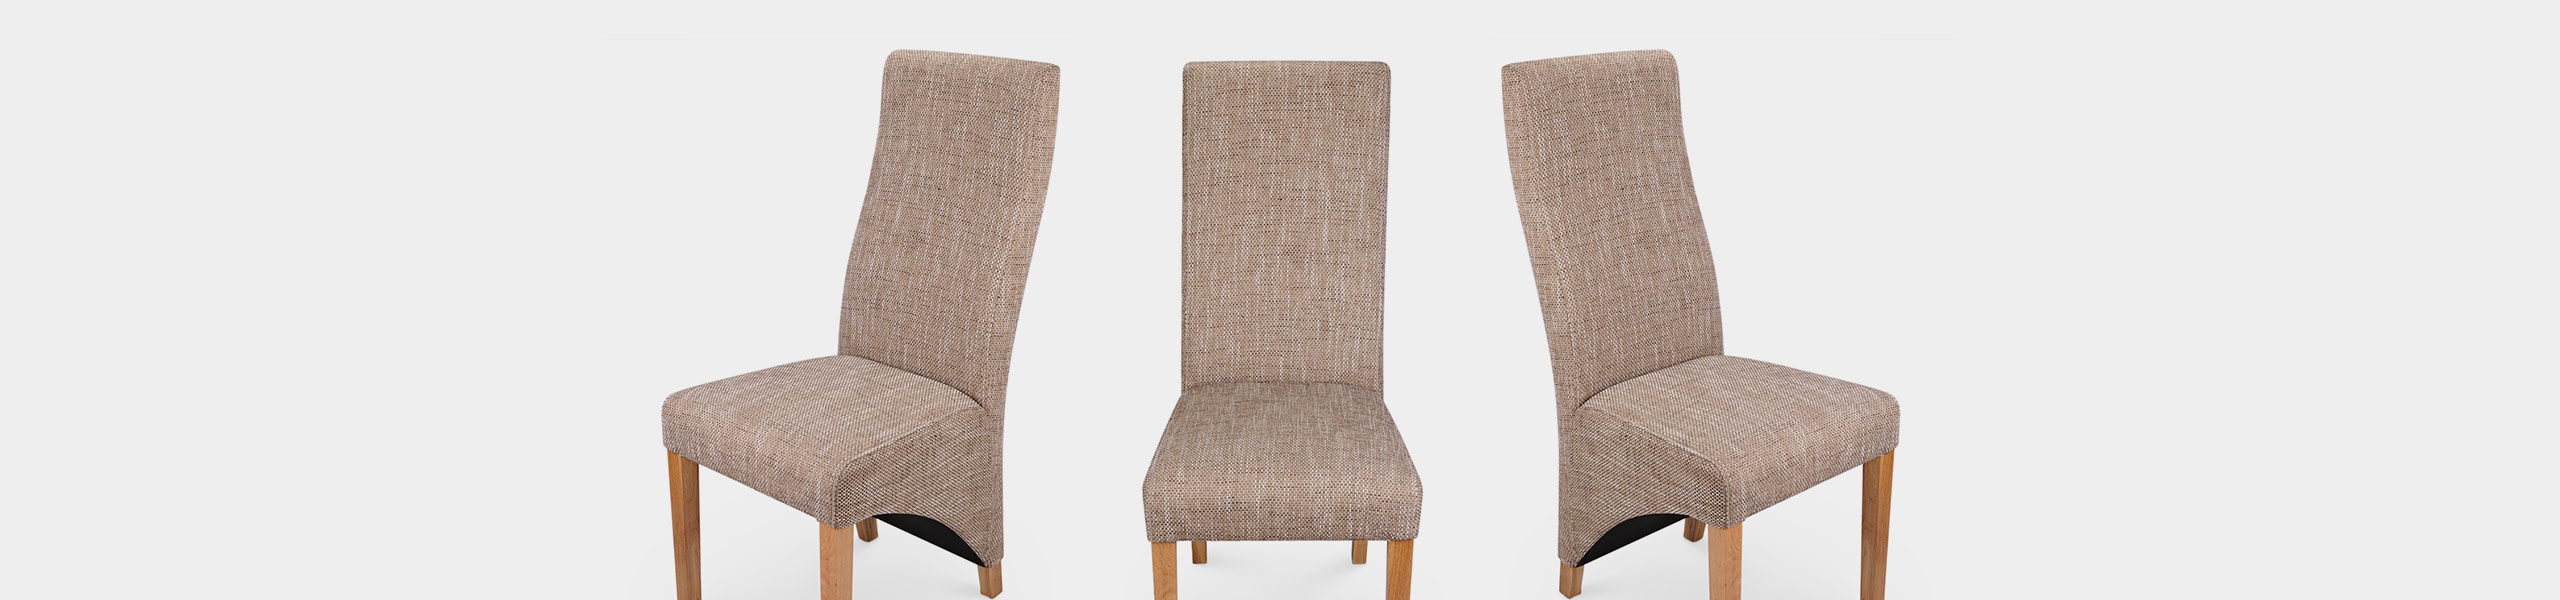 Baxter Dining Chair Tweed Video Banner